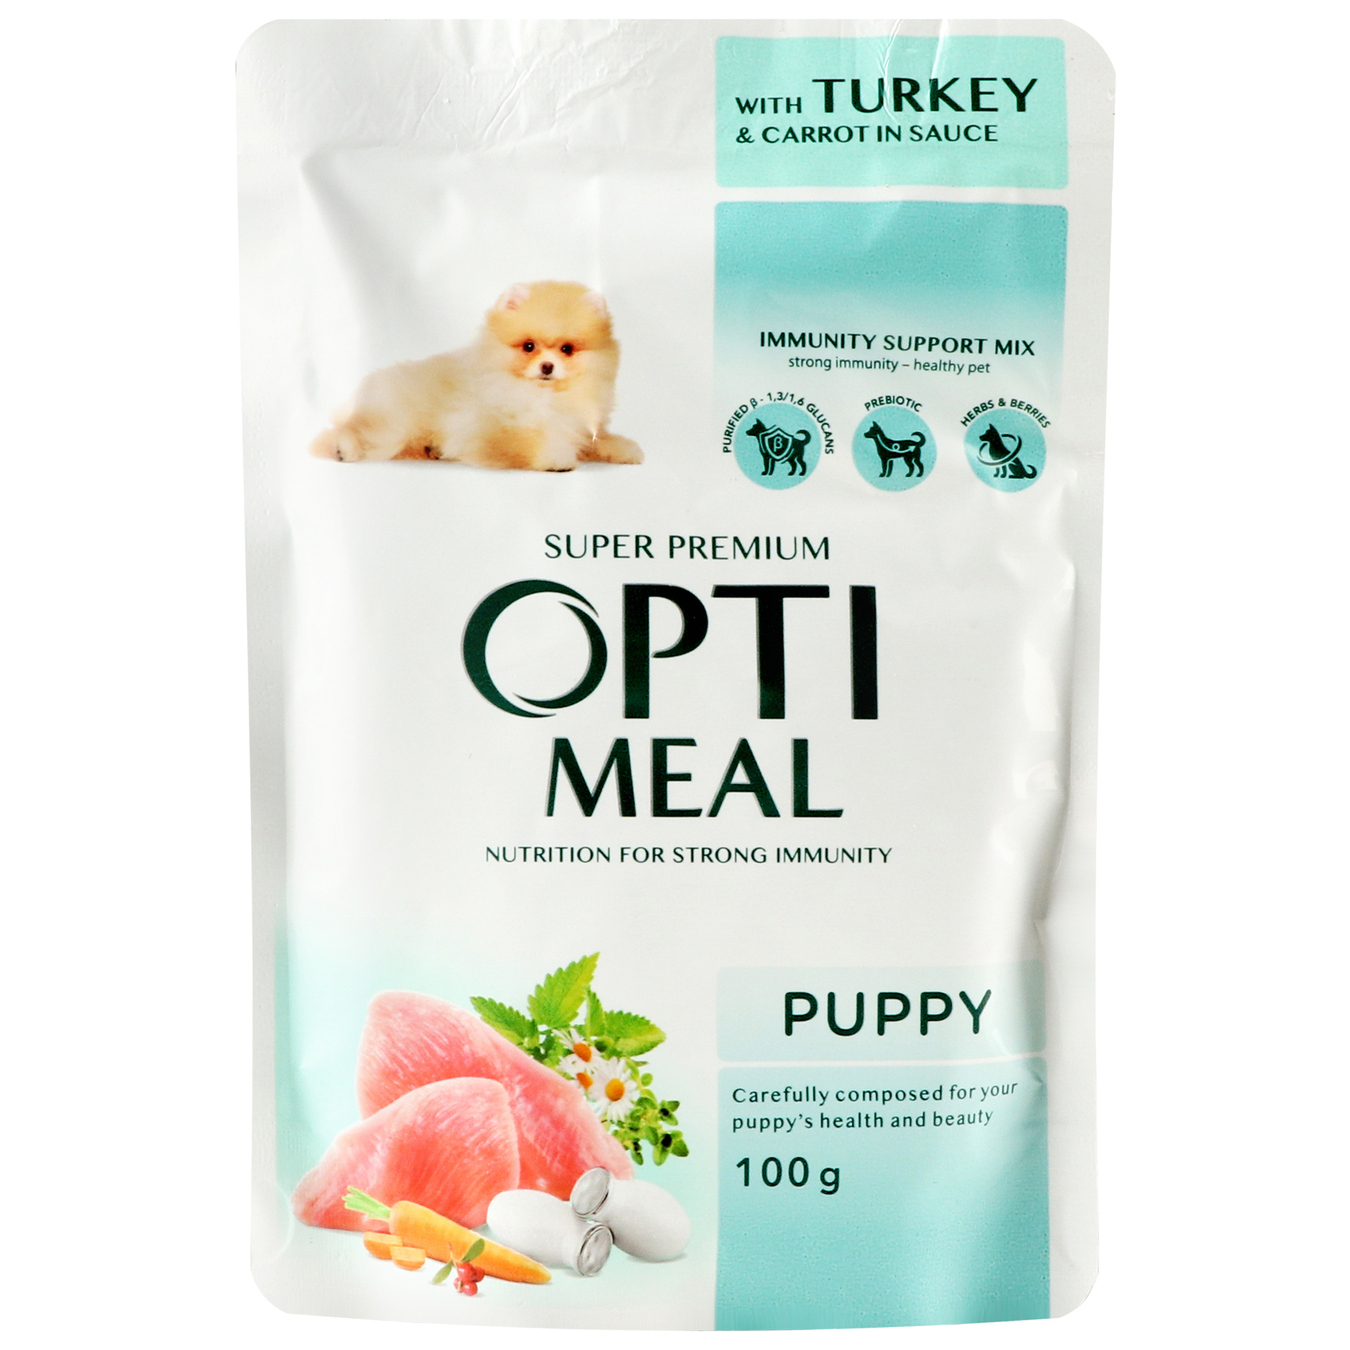 Food for puppies Optimeal with turkey and carrots in sauce pouch 100g